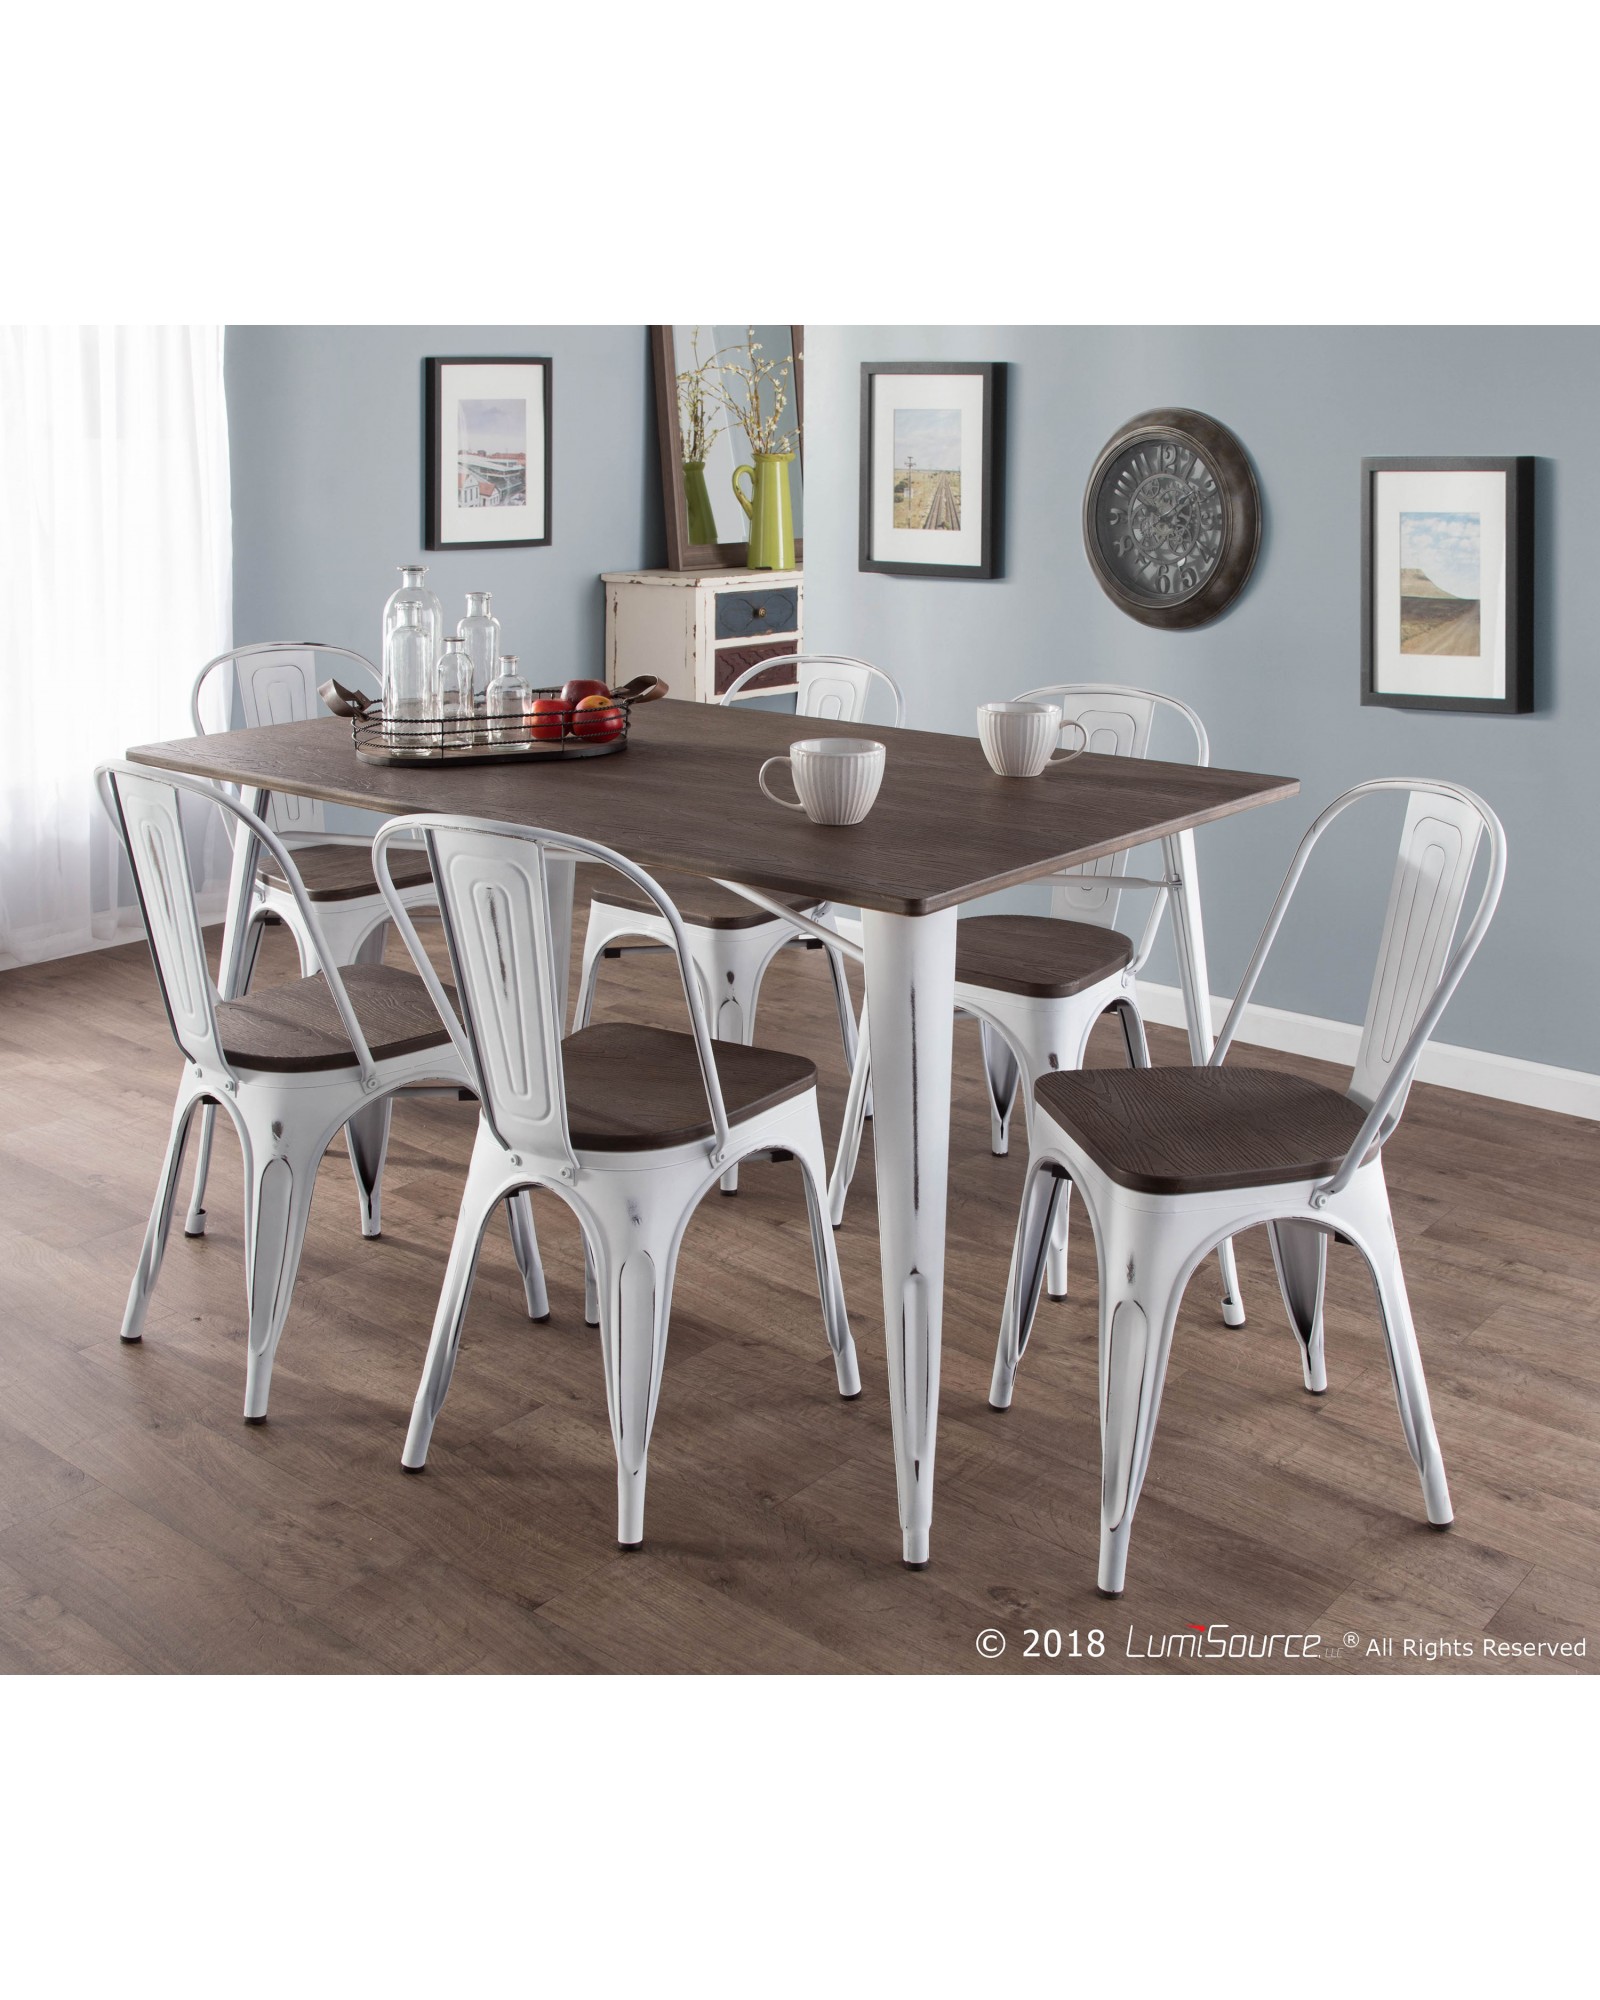 Oregon 7-Piece Industrial-Farmhouse Dining Set in Vintage White and Espresso